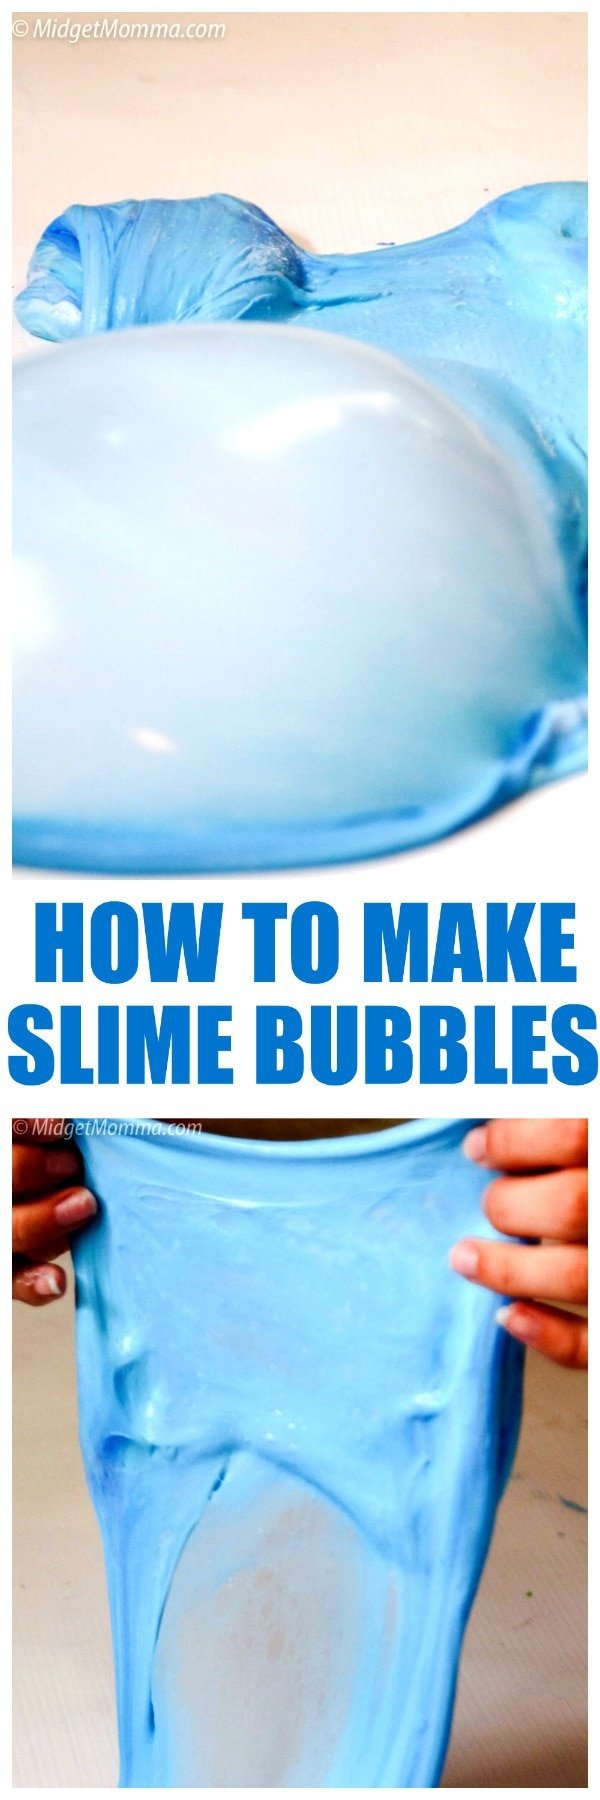 How to Make a Slime Bubble. Trying to figure out what to do with your slime after you make it? Giant slime BUBBLES are so much fun to make! #Slime #SlimeMaking #SlimeBubble #SlimeRecipe #EasySlime